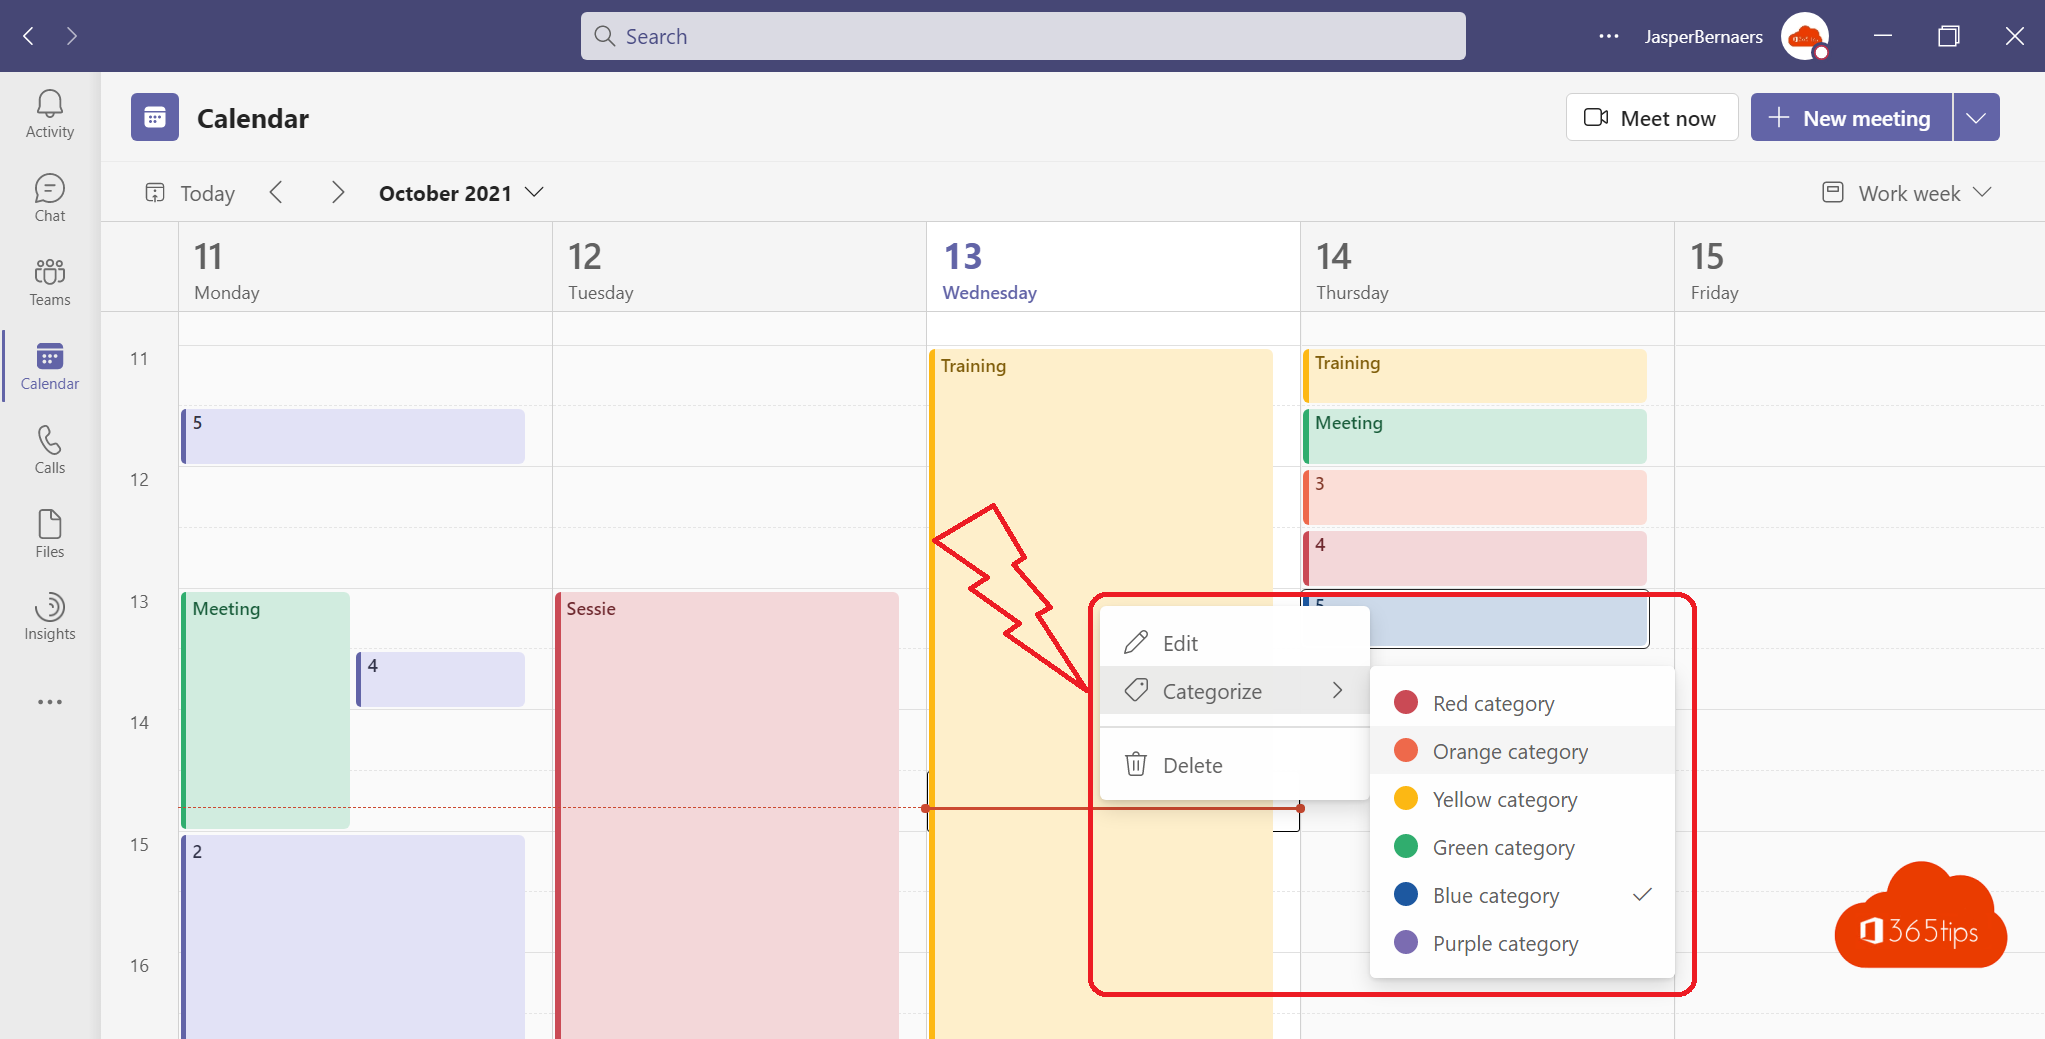 How to use categories and colour codes in Microsoft Teams calendar?